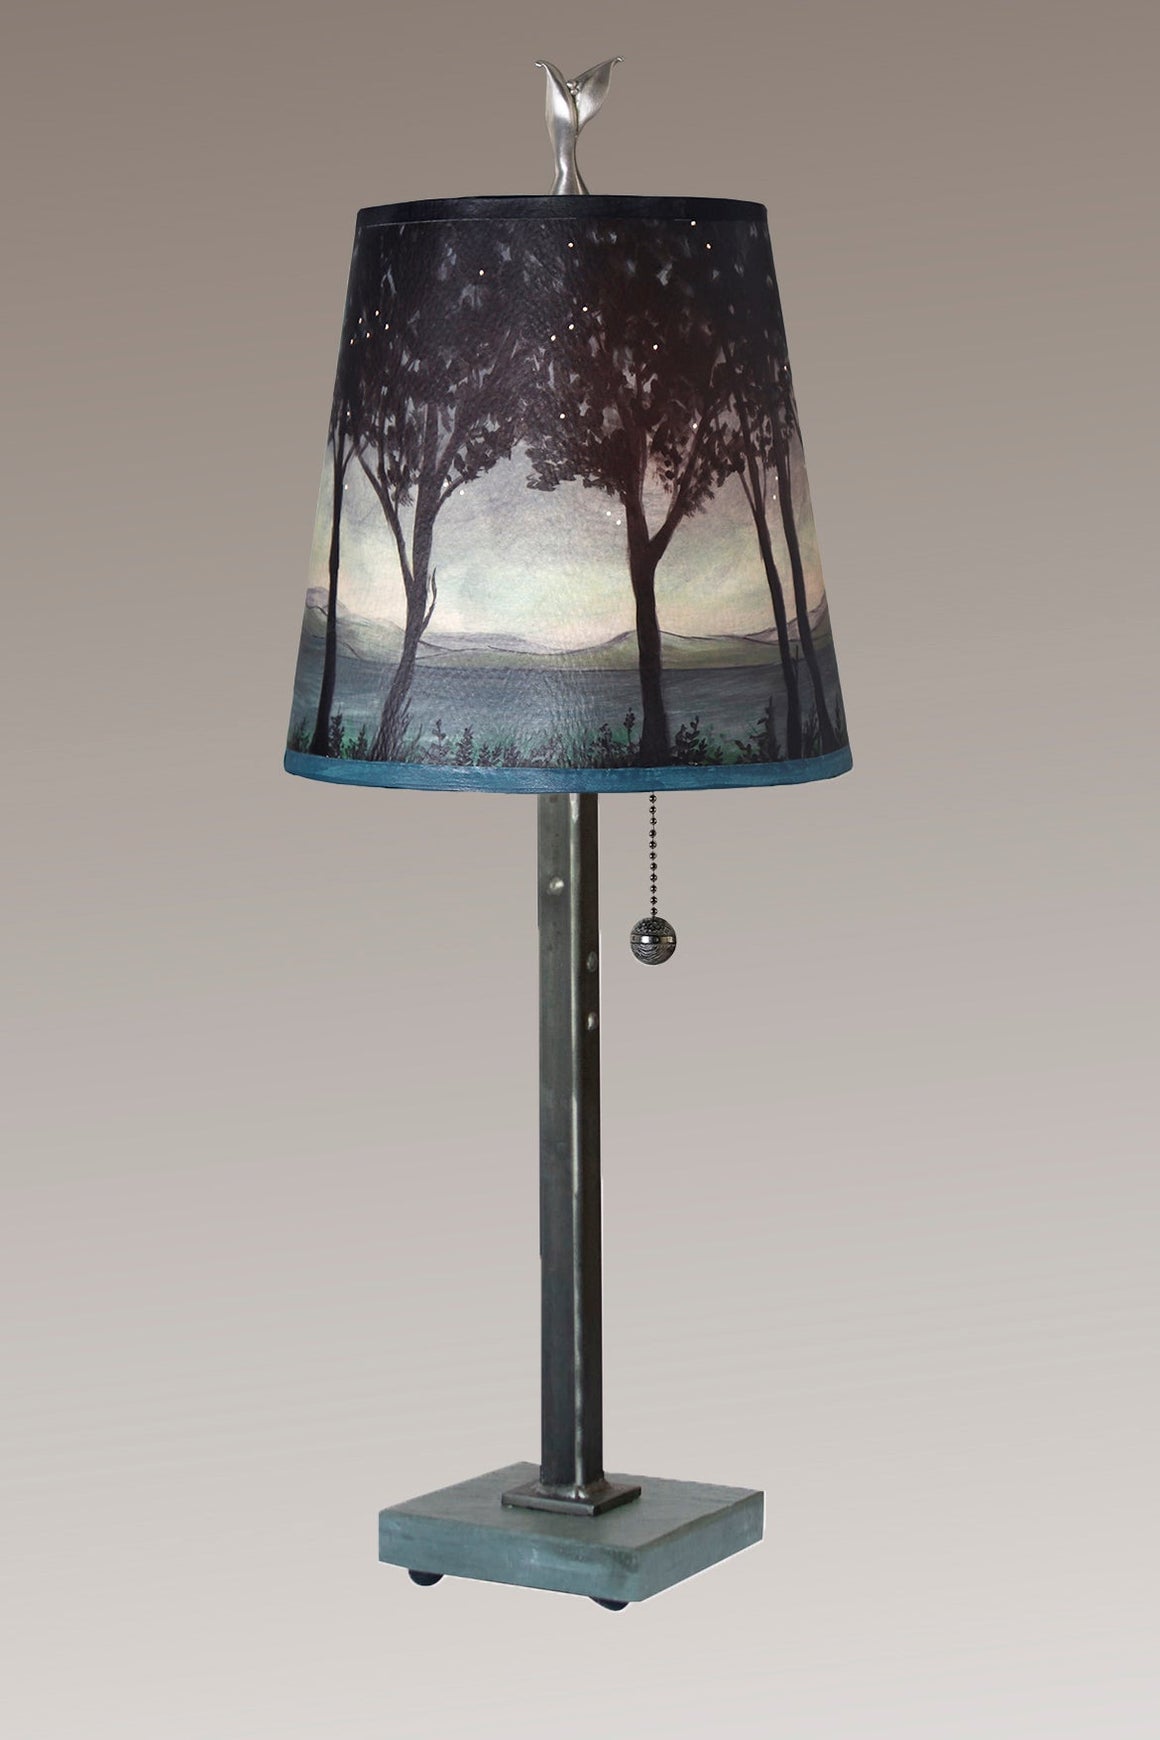 Steel Table Lamp with Small Drum Shade in Twilight